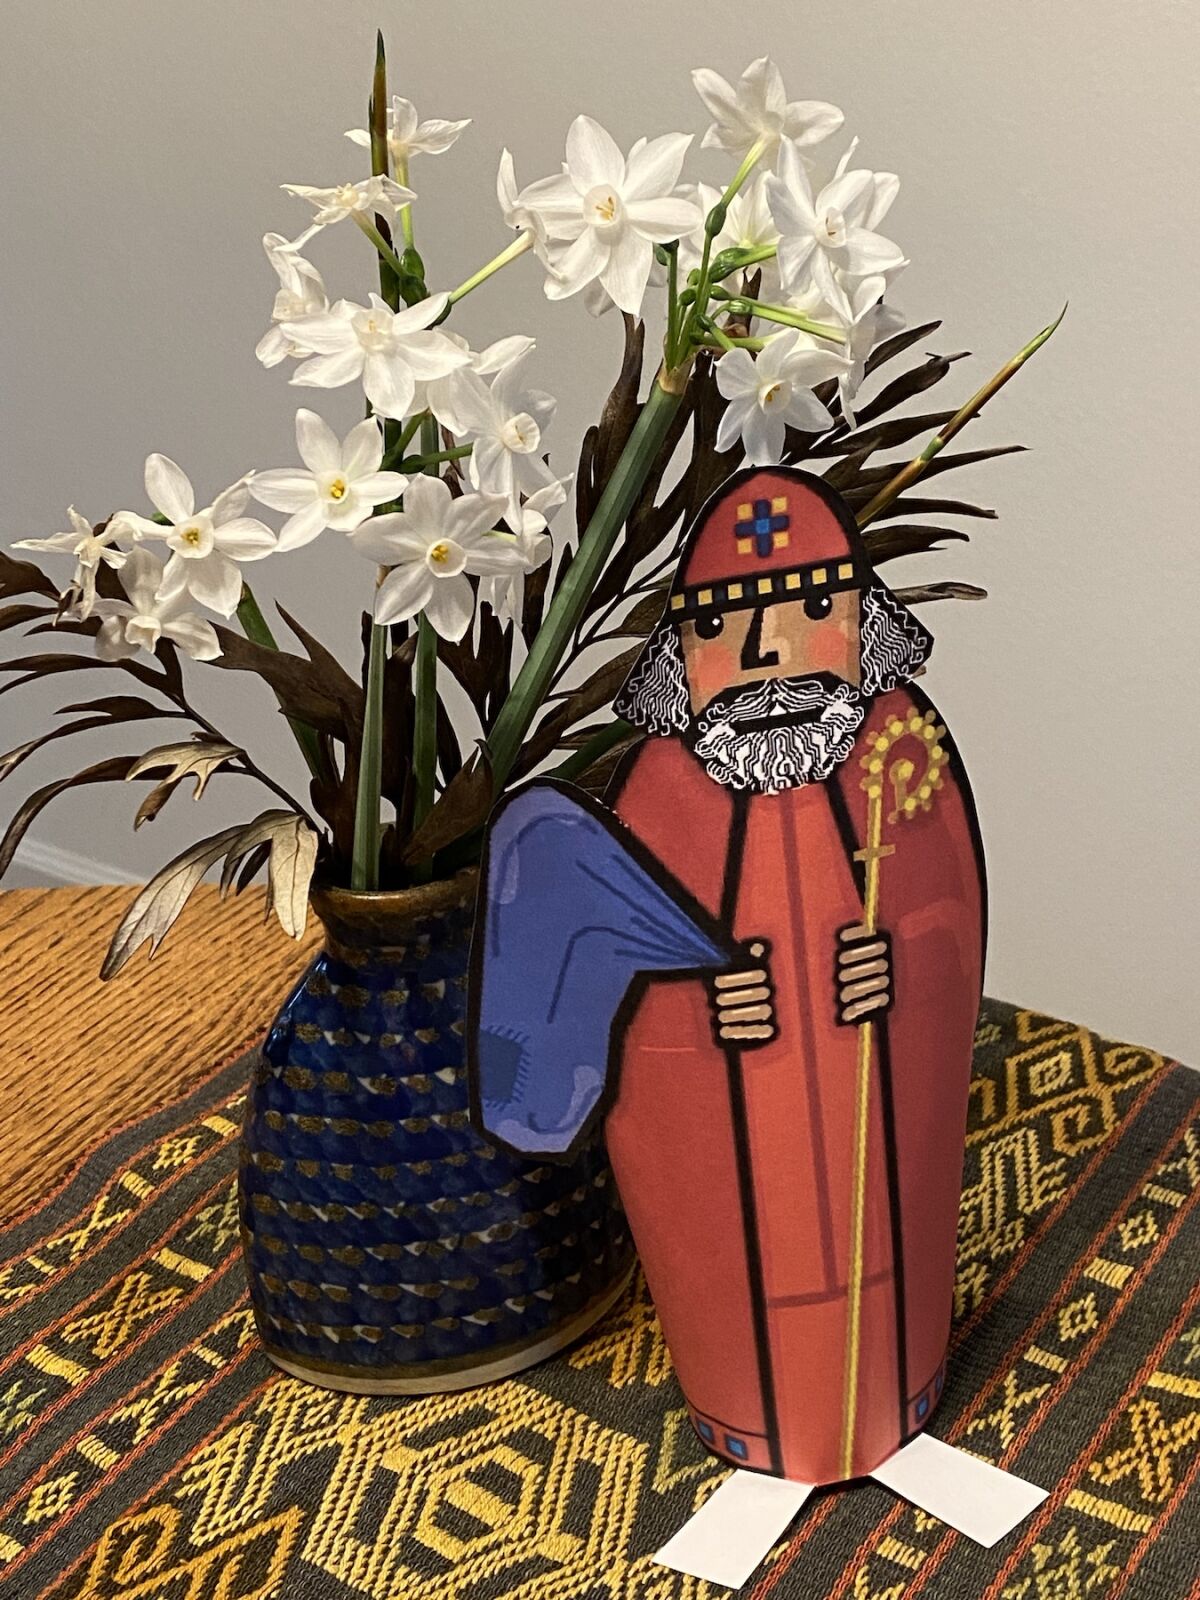 St. Nicholas, who was the inspiration for Santa Claus, with wild narcissus flowers found along a roadside.